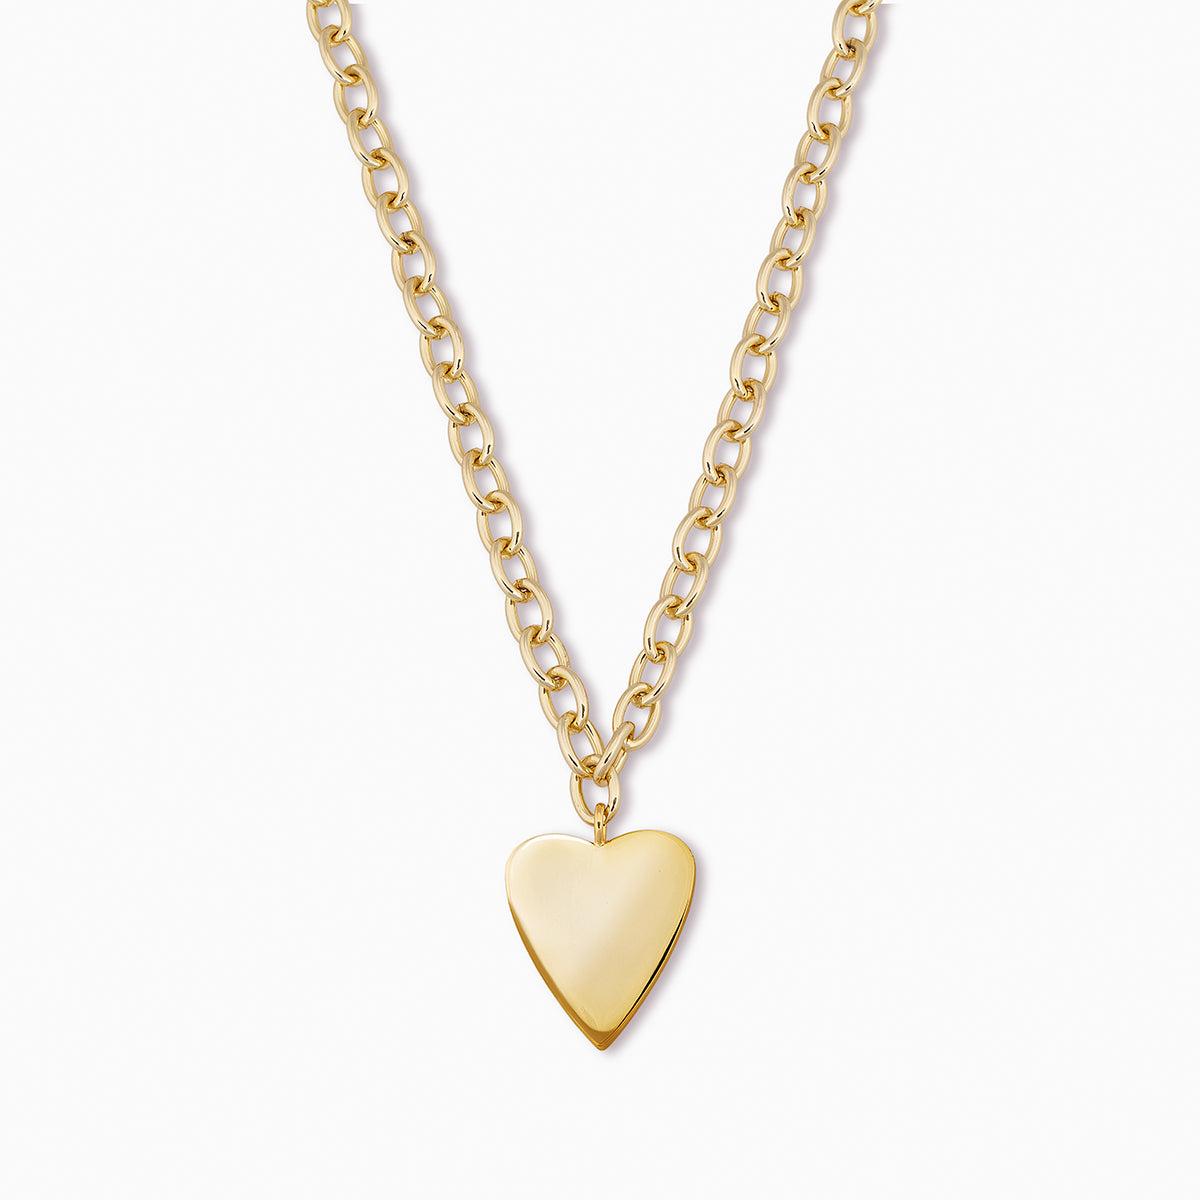 Big Love Necklace | Gold | Product Image | Uncommon James